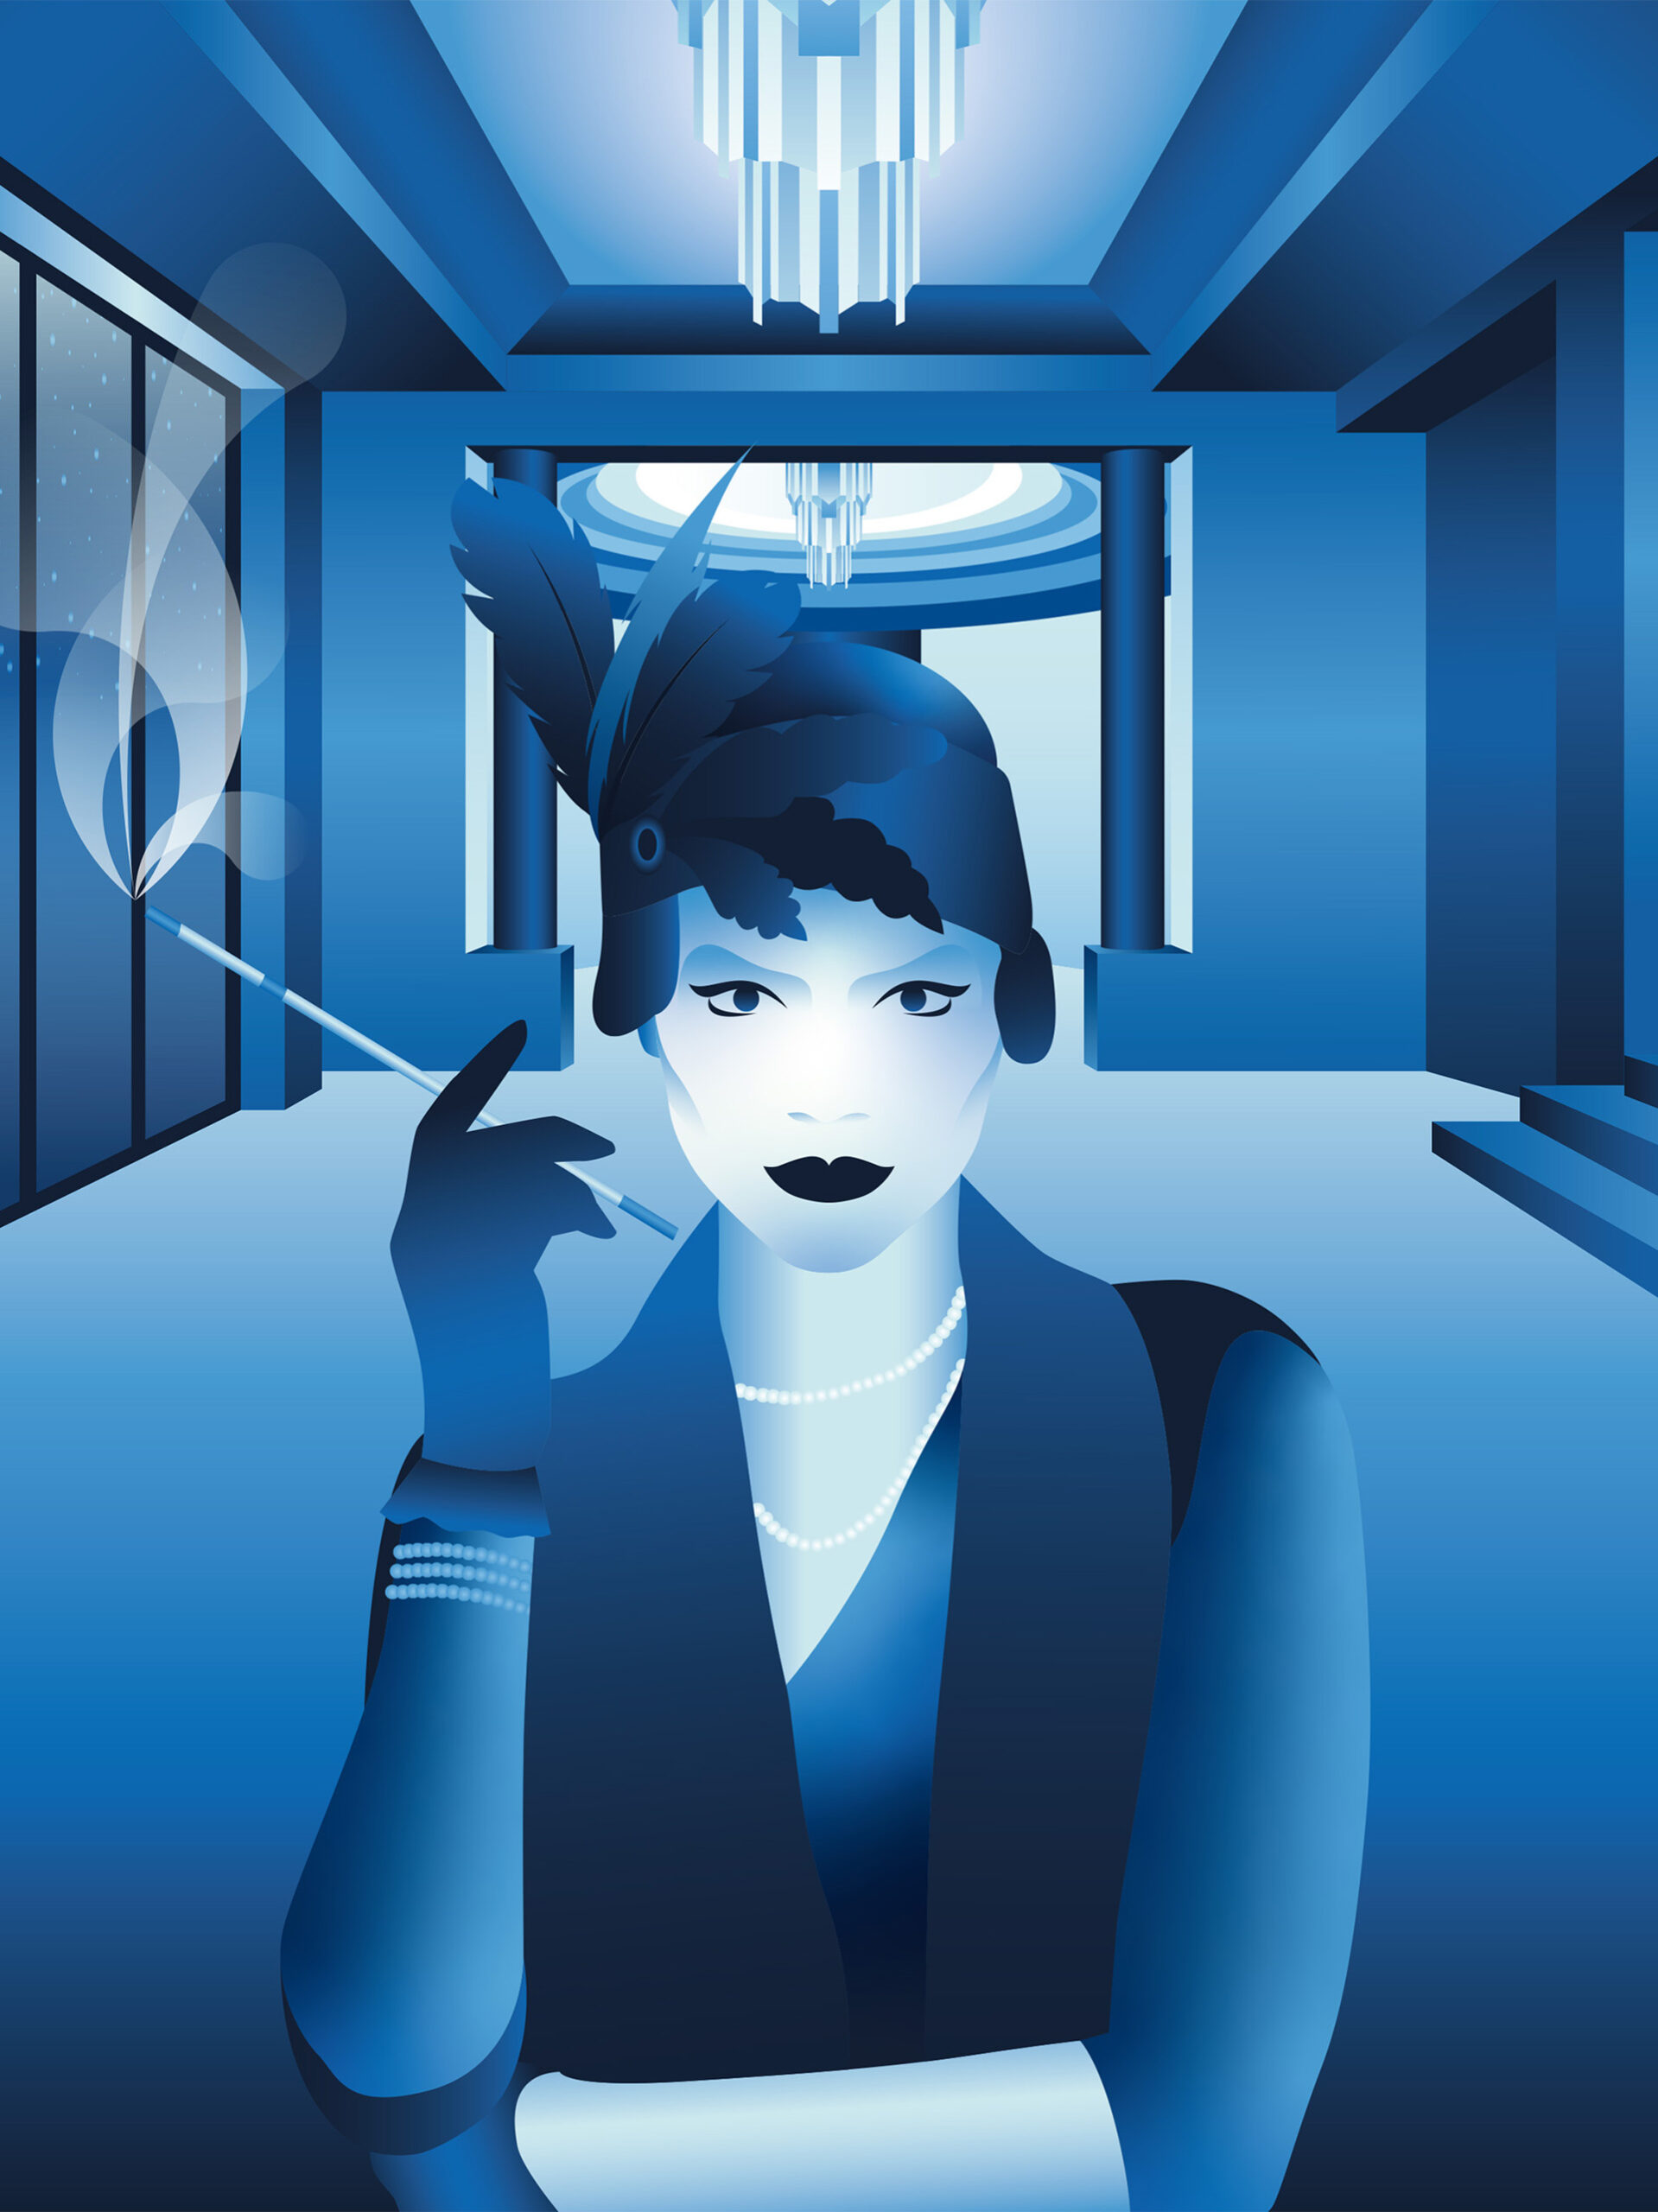 blue illustration of an art deco era woman holding a cigarette holder while standing in a lobby